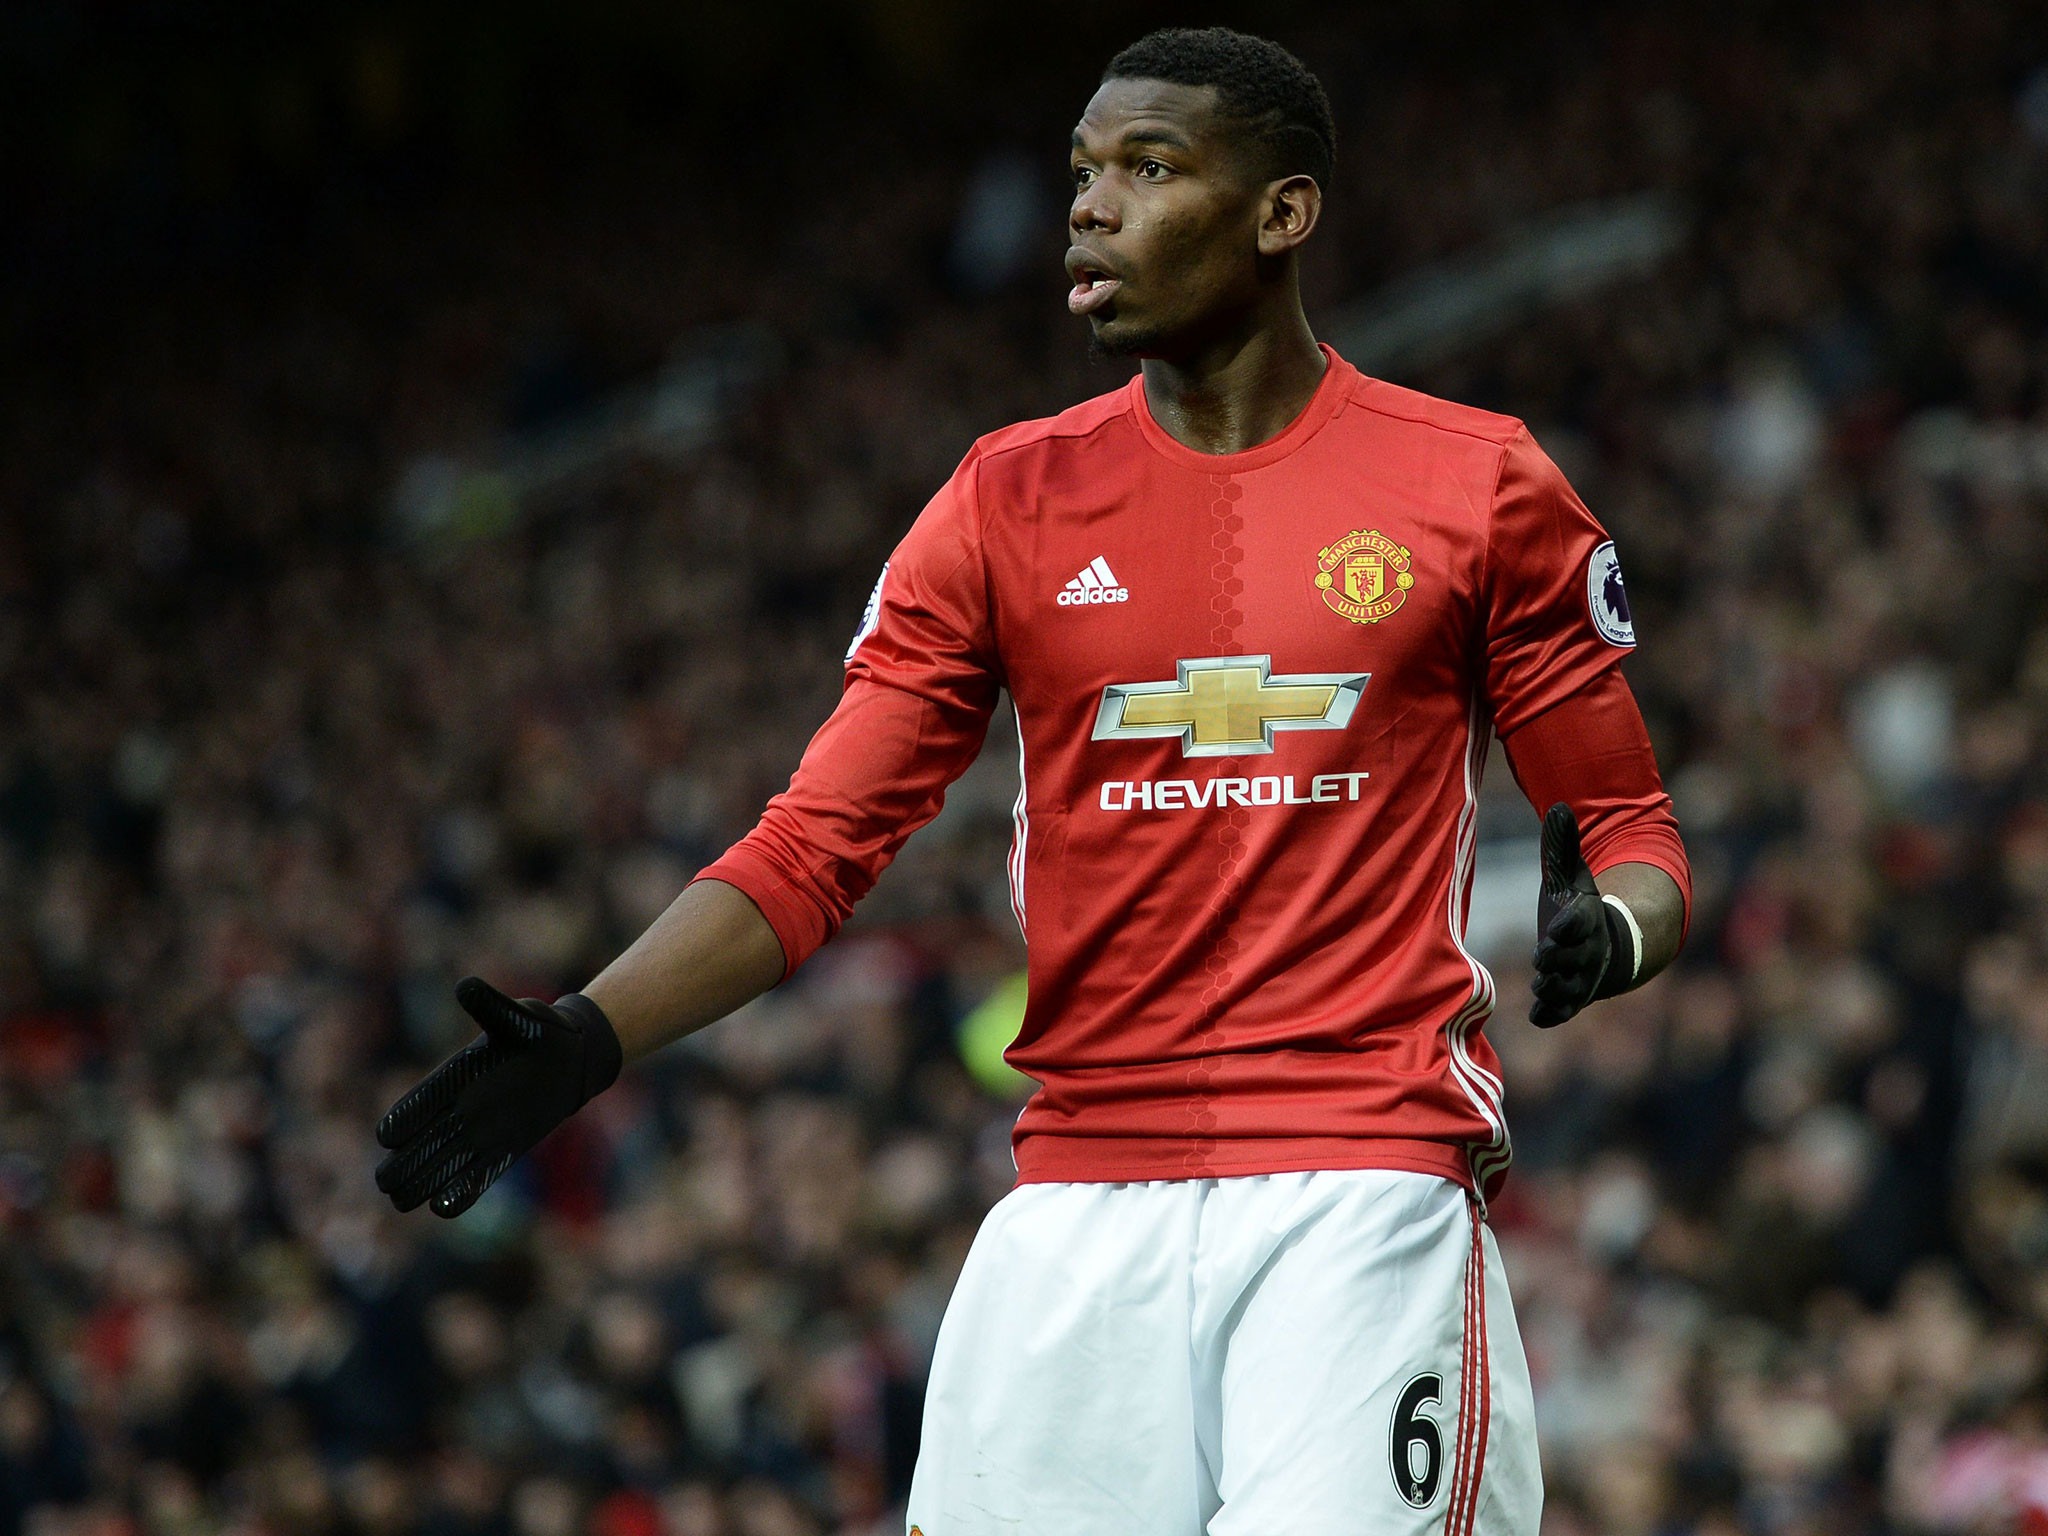 2048x1536 Paul Pogba's injury could make Manchester United hire specialist coach. The  running style of Pogba has been analysed by United to see if that could be  ...